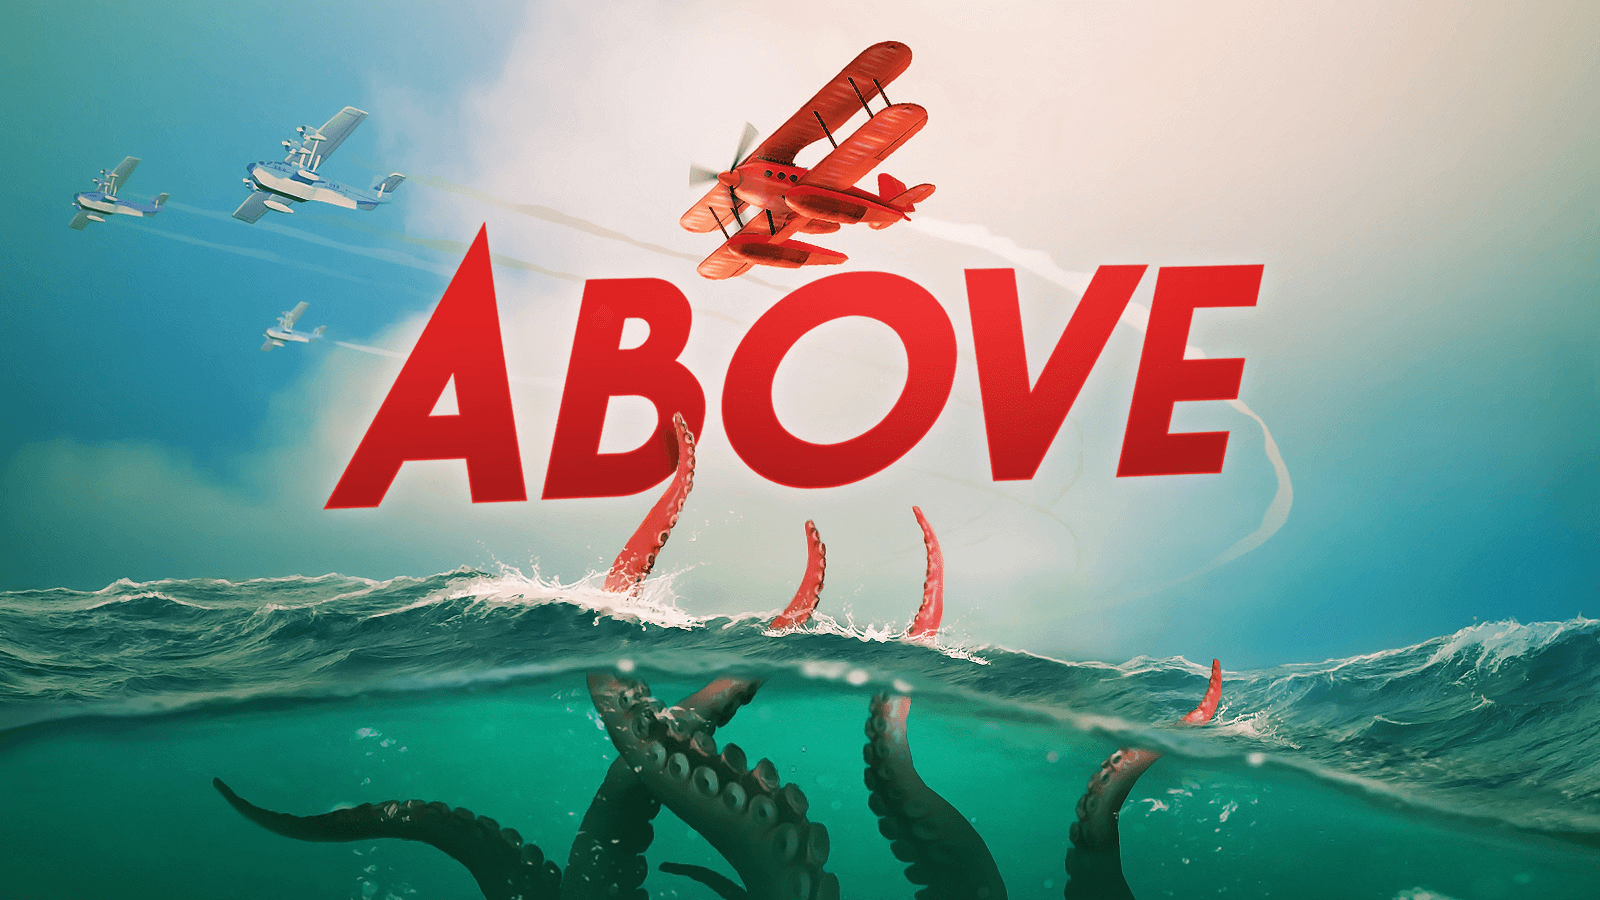 Above promotional key art, red biplane flying above an ocean with tentacles reaching out